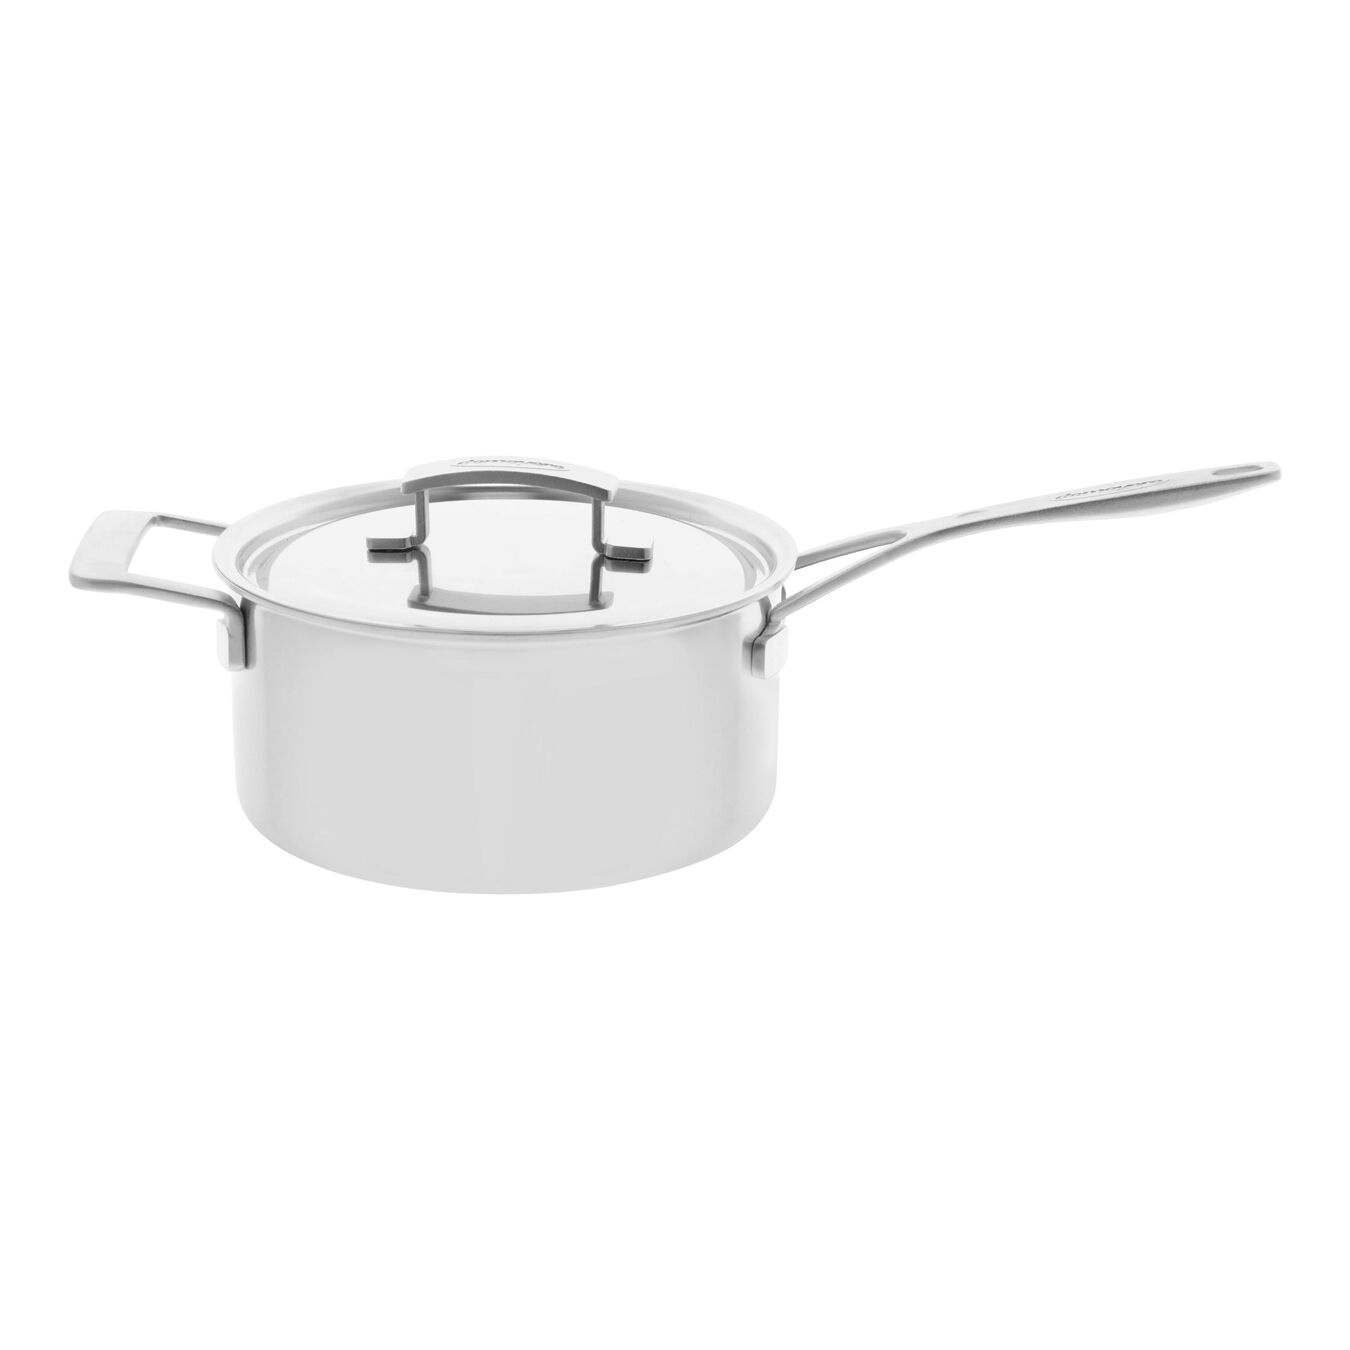 4 l 18/10 Stainless Steel round Sauce pan with lid, silver,,large 1